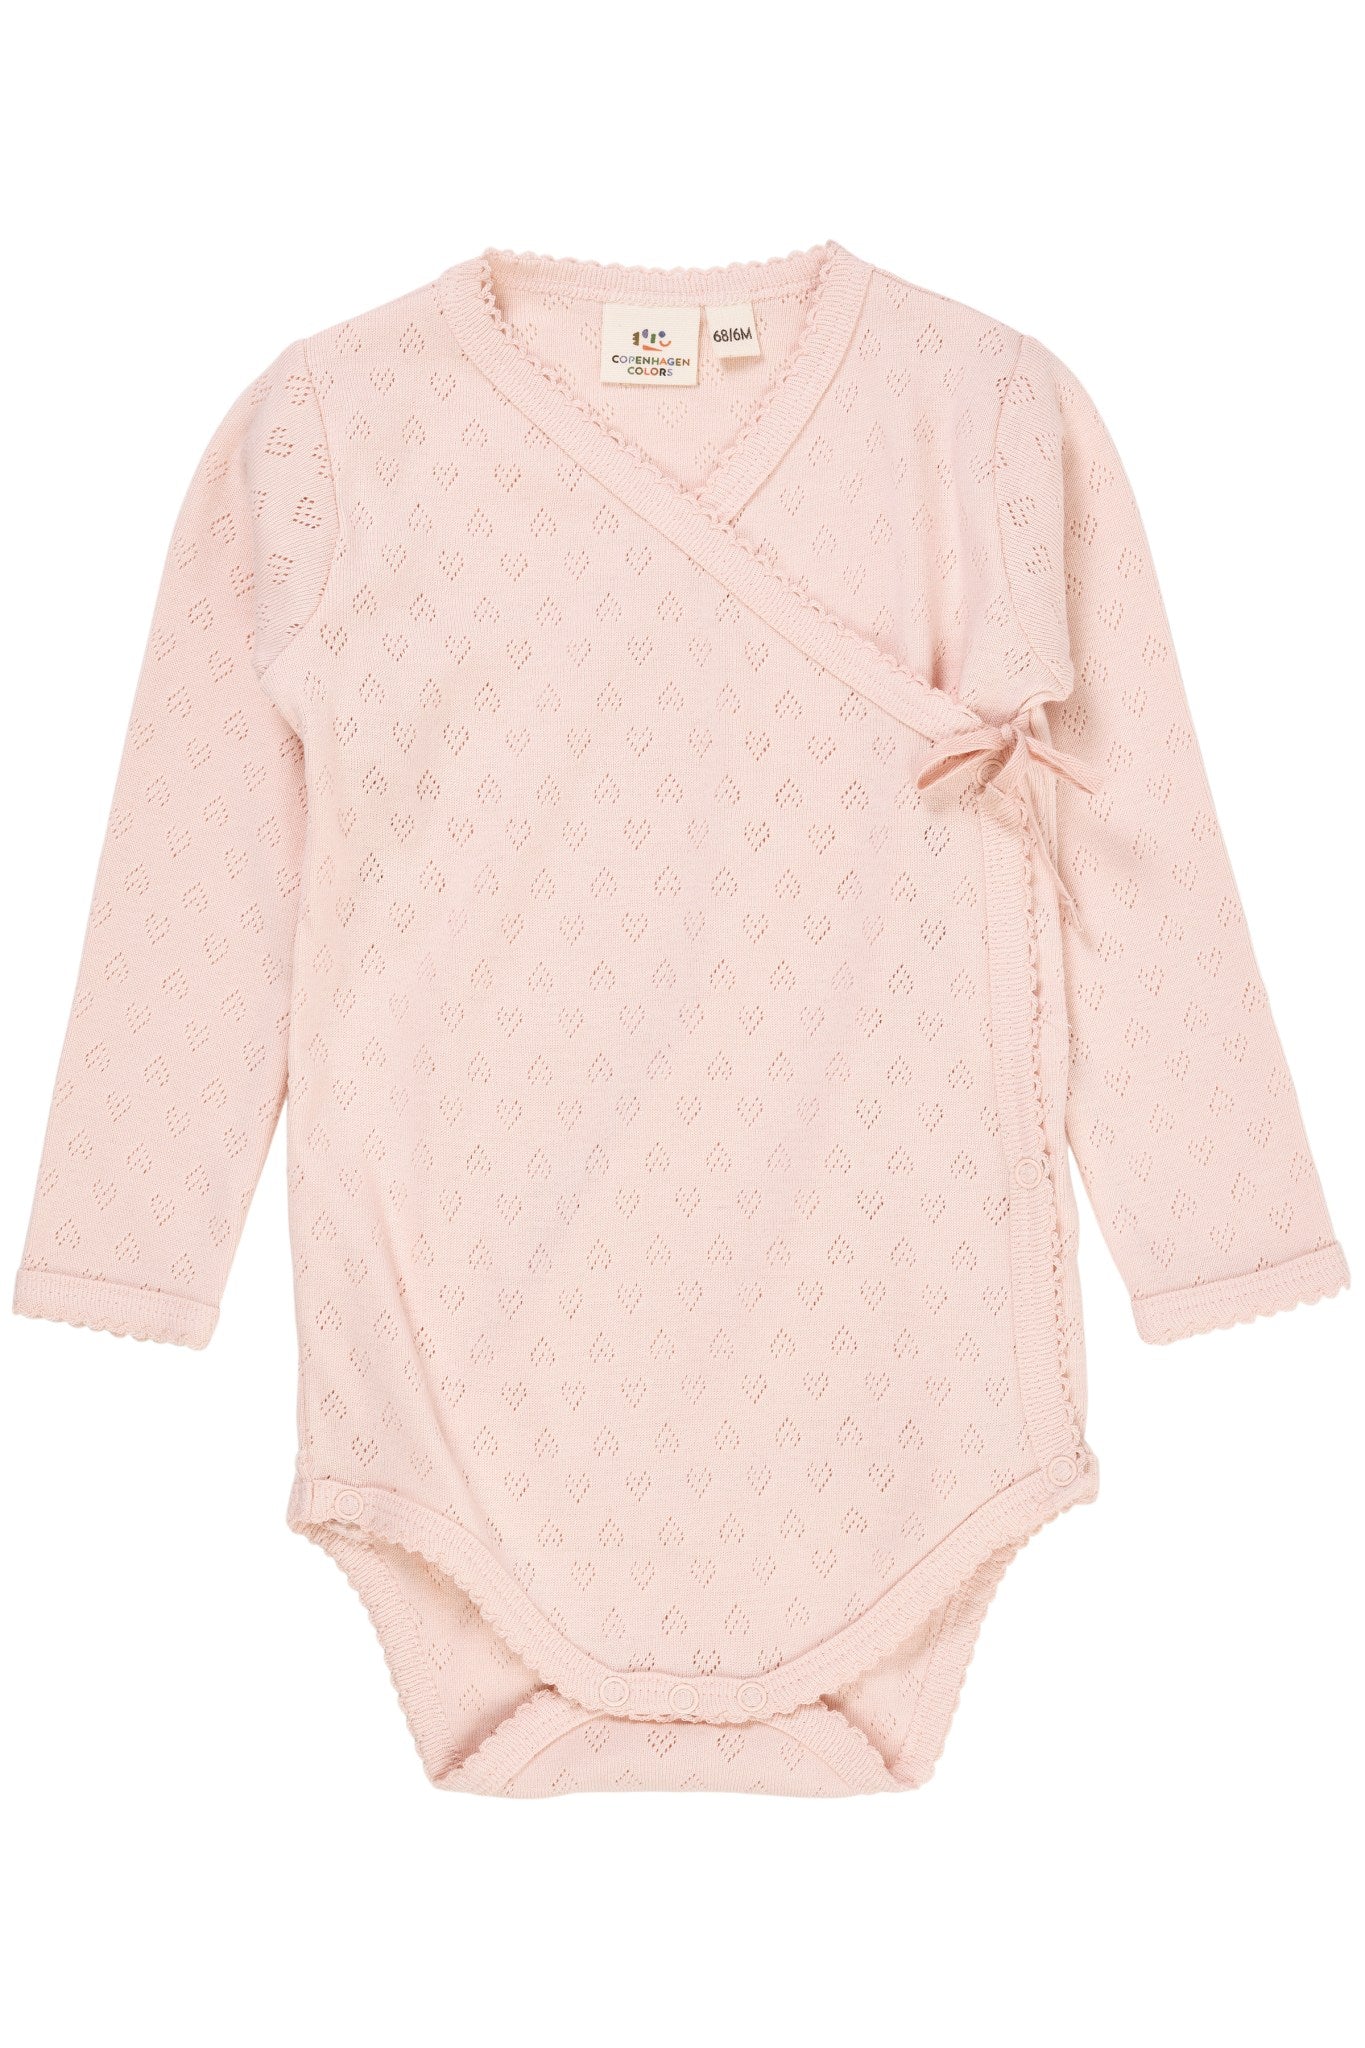 POINTELLE HEART CROSSOVER BODY LS - DUSTY ROSE